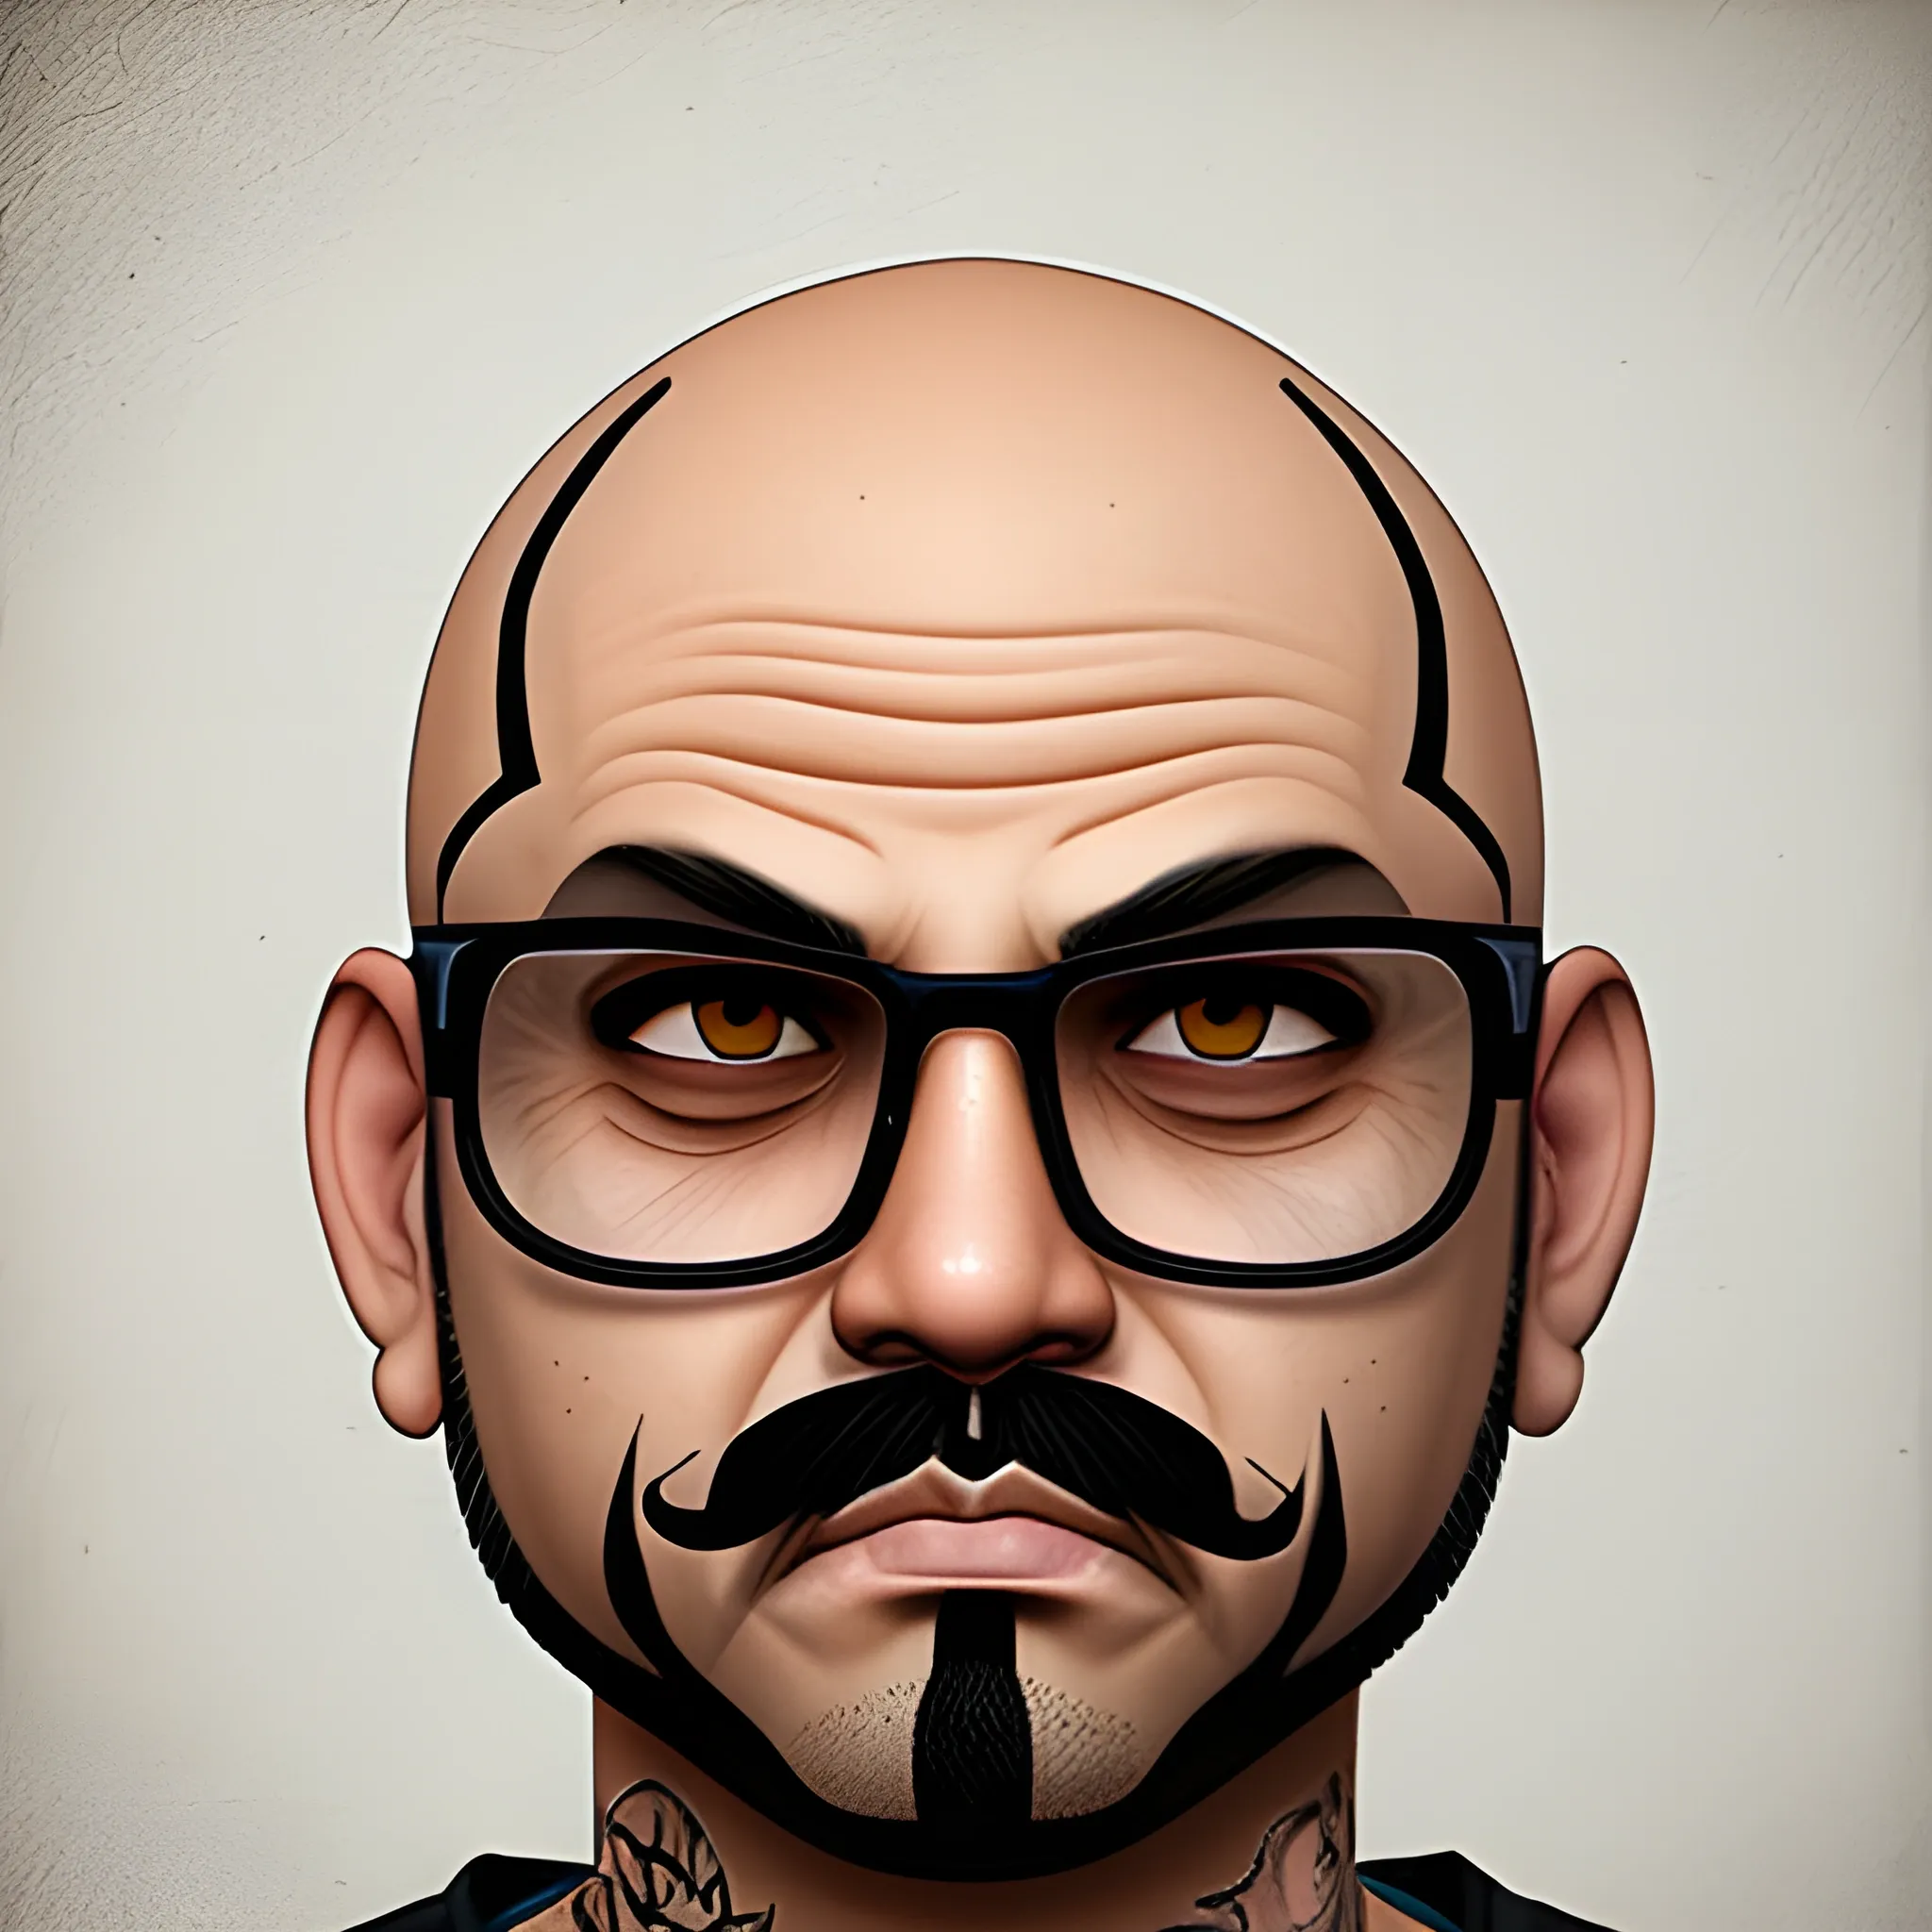 BALD CHOLO, MUSTACHE, CHICANO, 3D, FACE, AVATAR STYLE, GTA DRAWING STYLE, GTA ART STYLE, FRONT ON, OFF GLASSES, OFF TATTOS